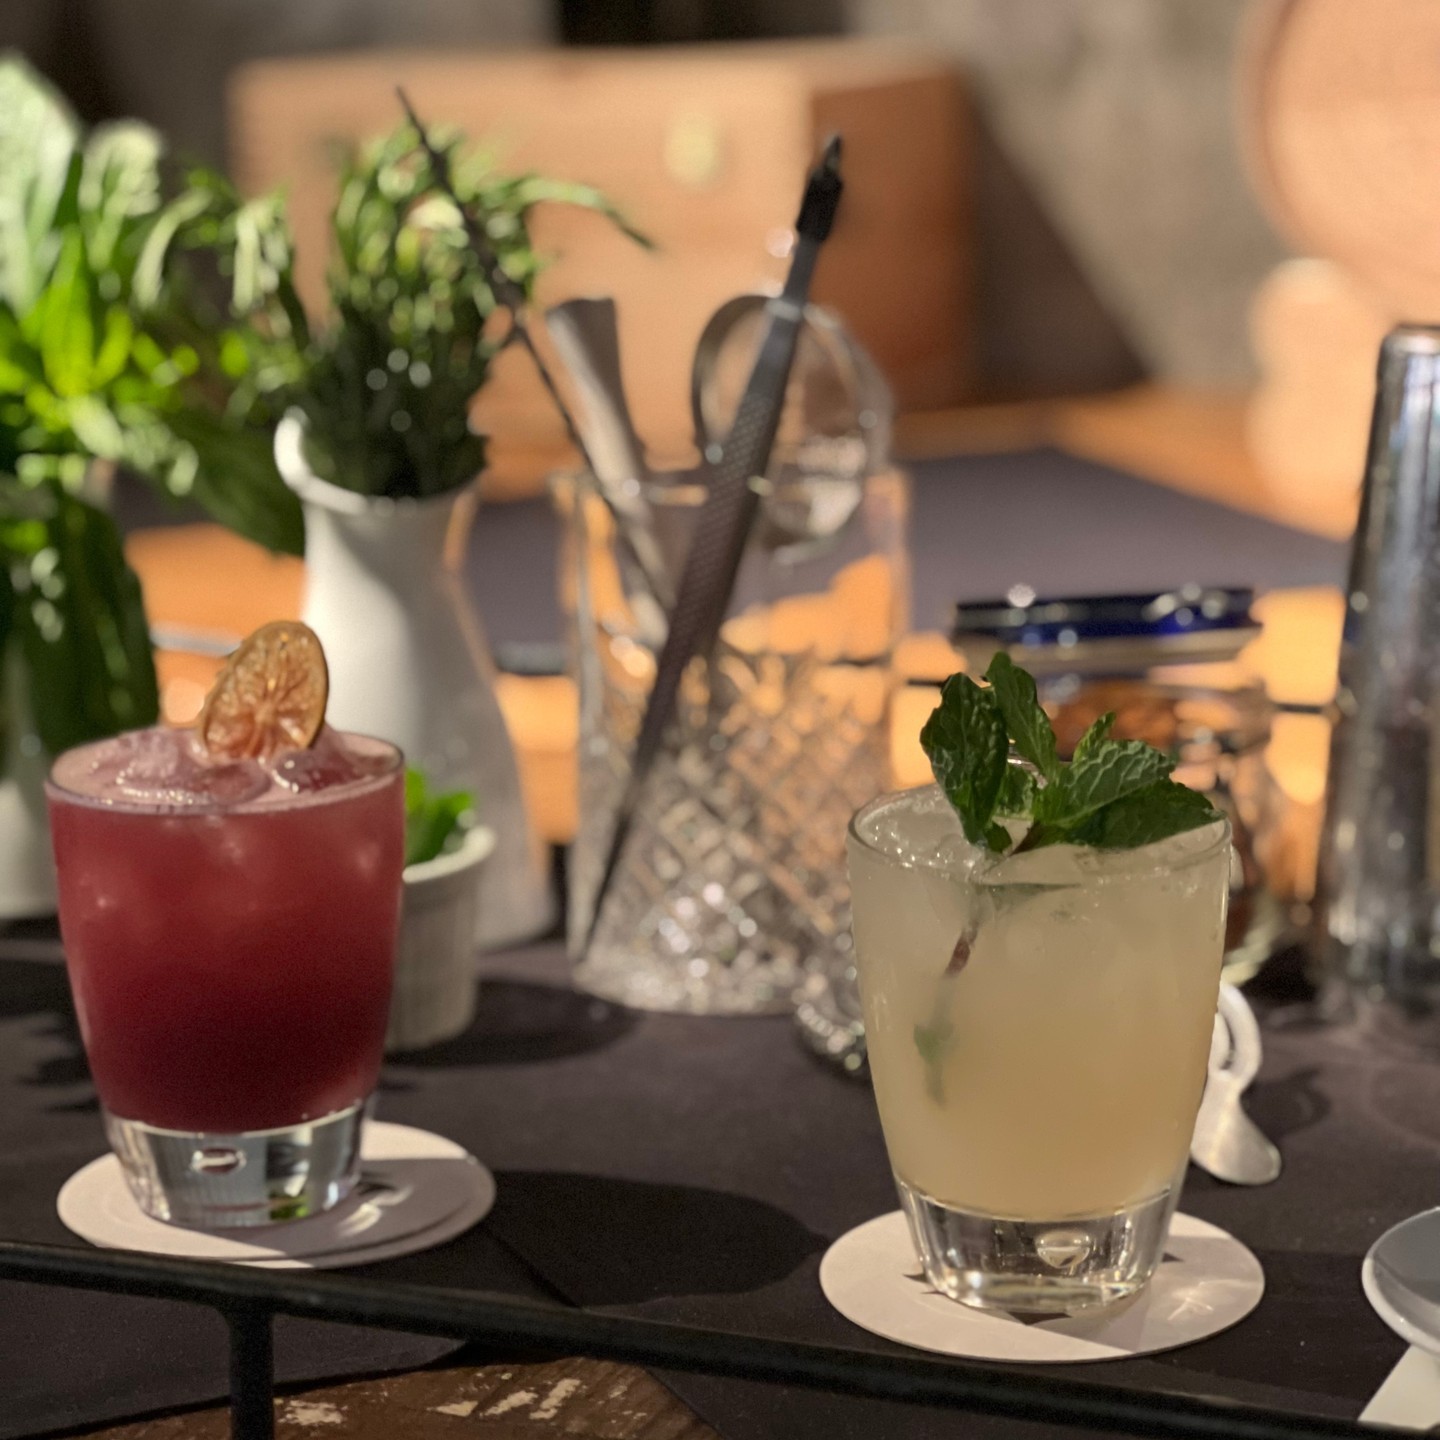 Three weeks of Dry January in the books! Celebrate with an incredible meal and one of our DIVINE Mocktails from Ryan Wise! The EstablishMint (see what we did there 🤣) features chamomile tea, Ogeat (a sweet almond syrup), mint simple syrup and lemon juice<br/>
<br/>
<br/>
<br/>
#dryjanuary #mocktails #alcoholfree #chsdrinks #drinklocal #soberlife #sobercurious #cocktail #quitdrinking